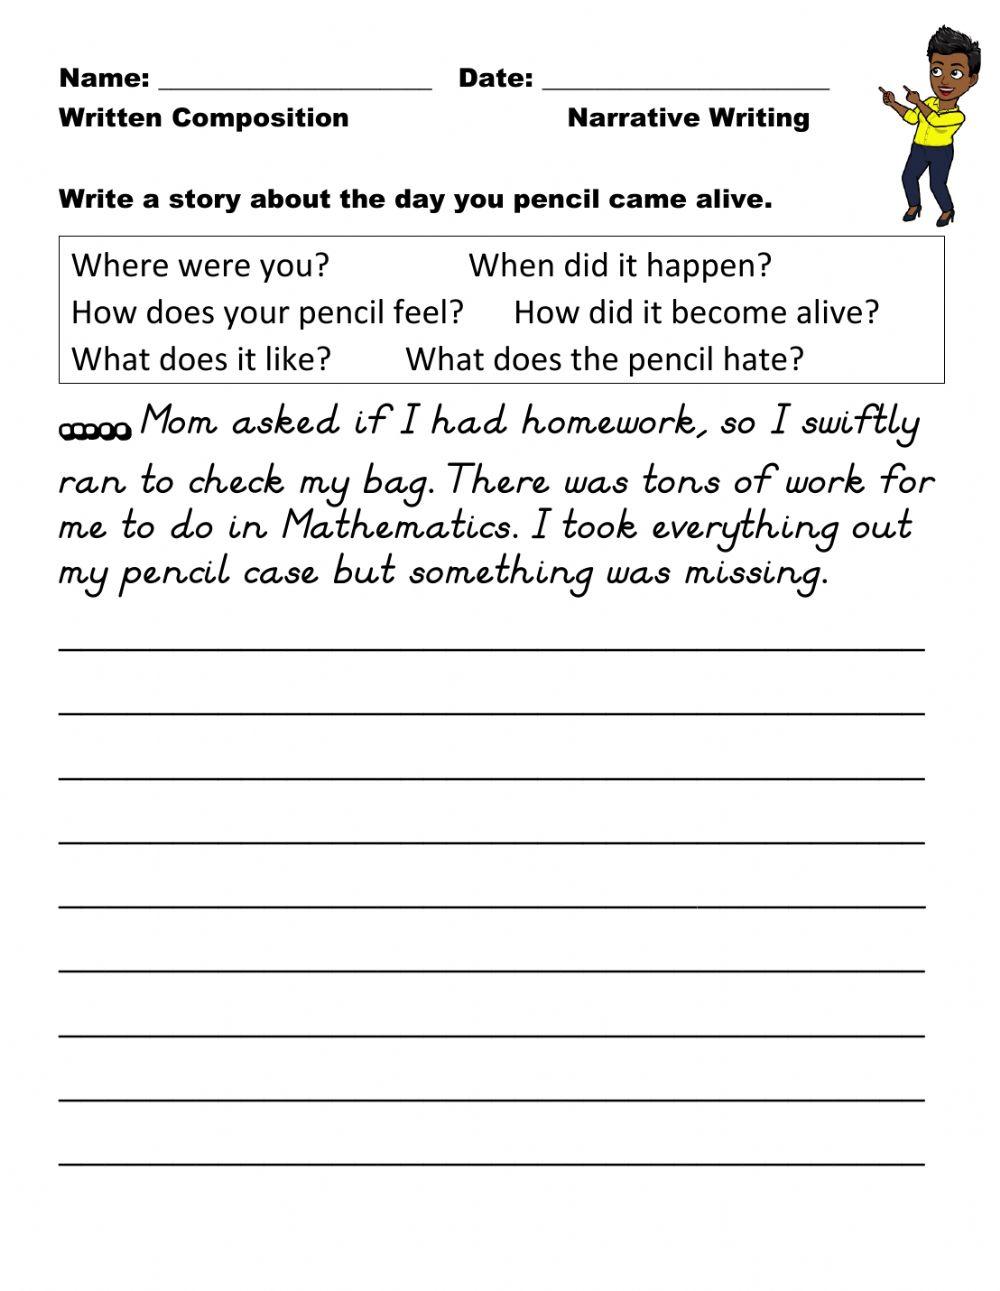 Narrative writing:My pencil is alive !